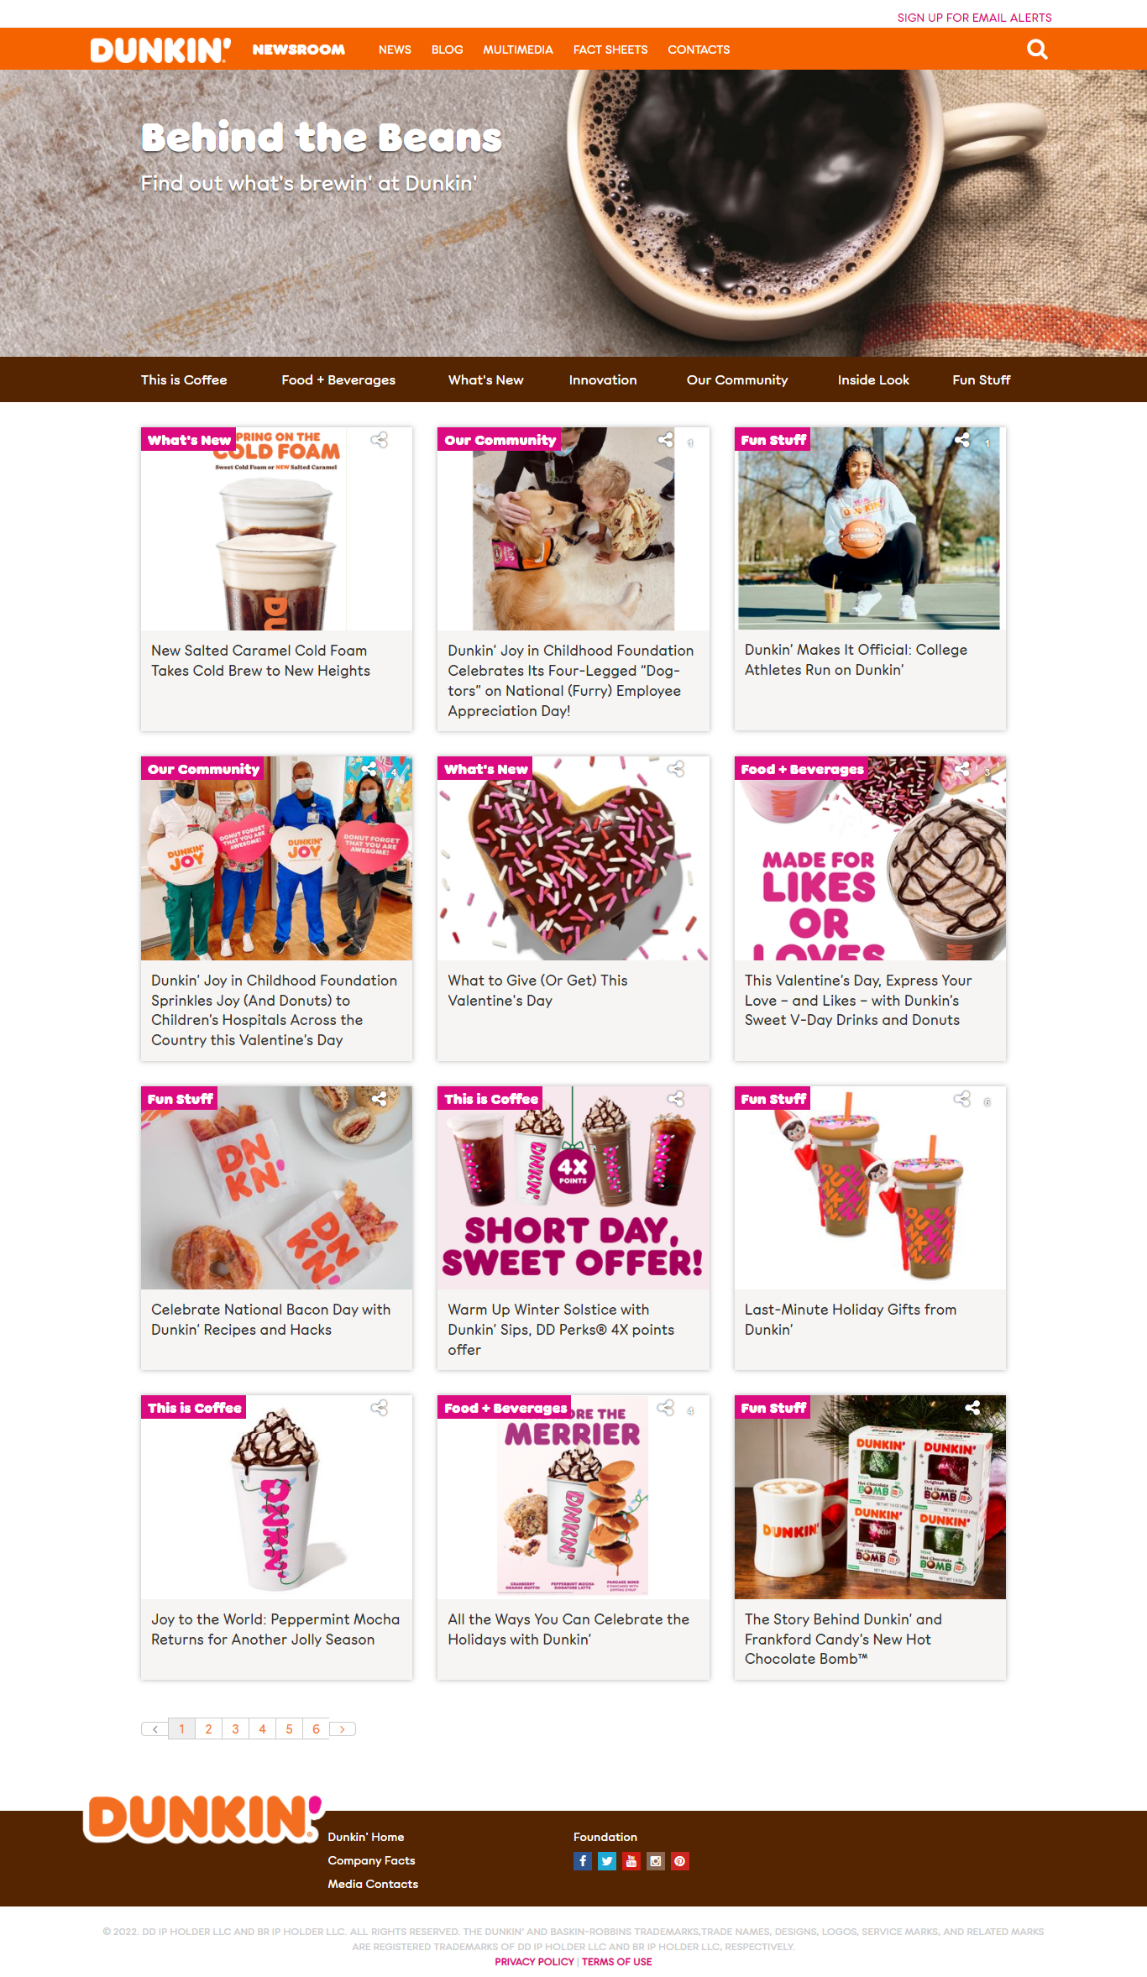 The Dunkin Donuts website